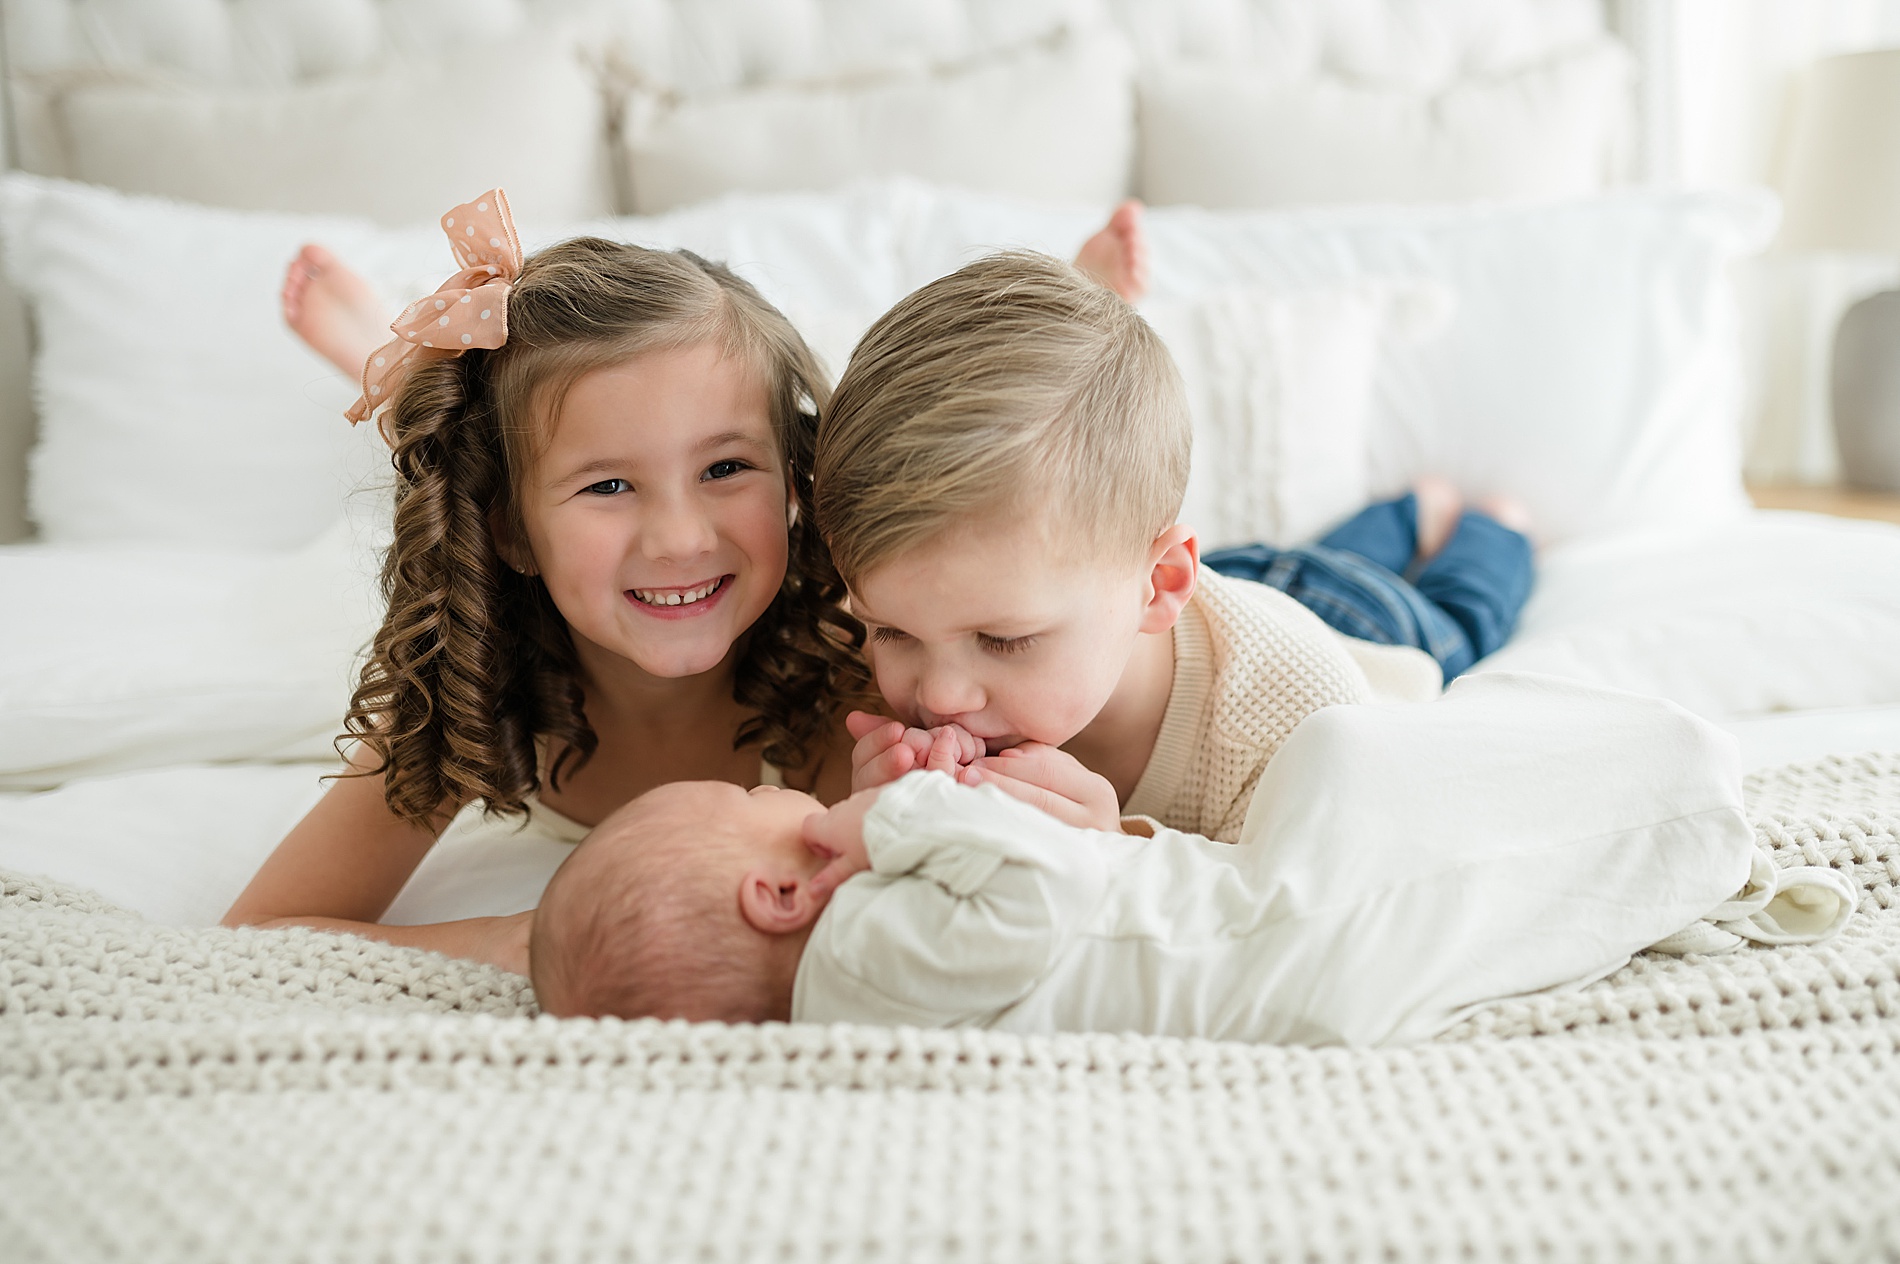 siblings with their baby brother from newborn session photographed by Lindsey Dutton Photography, a Dallas newborn photographer
